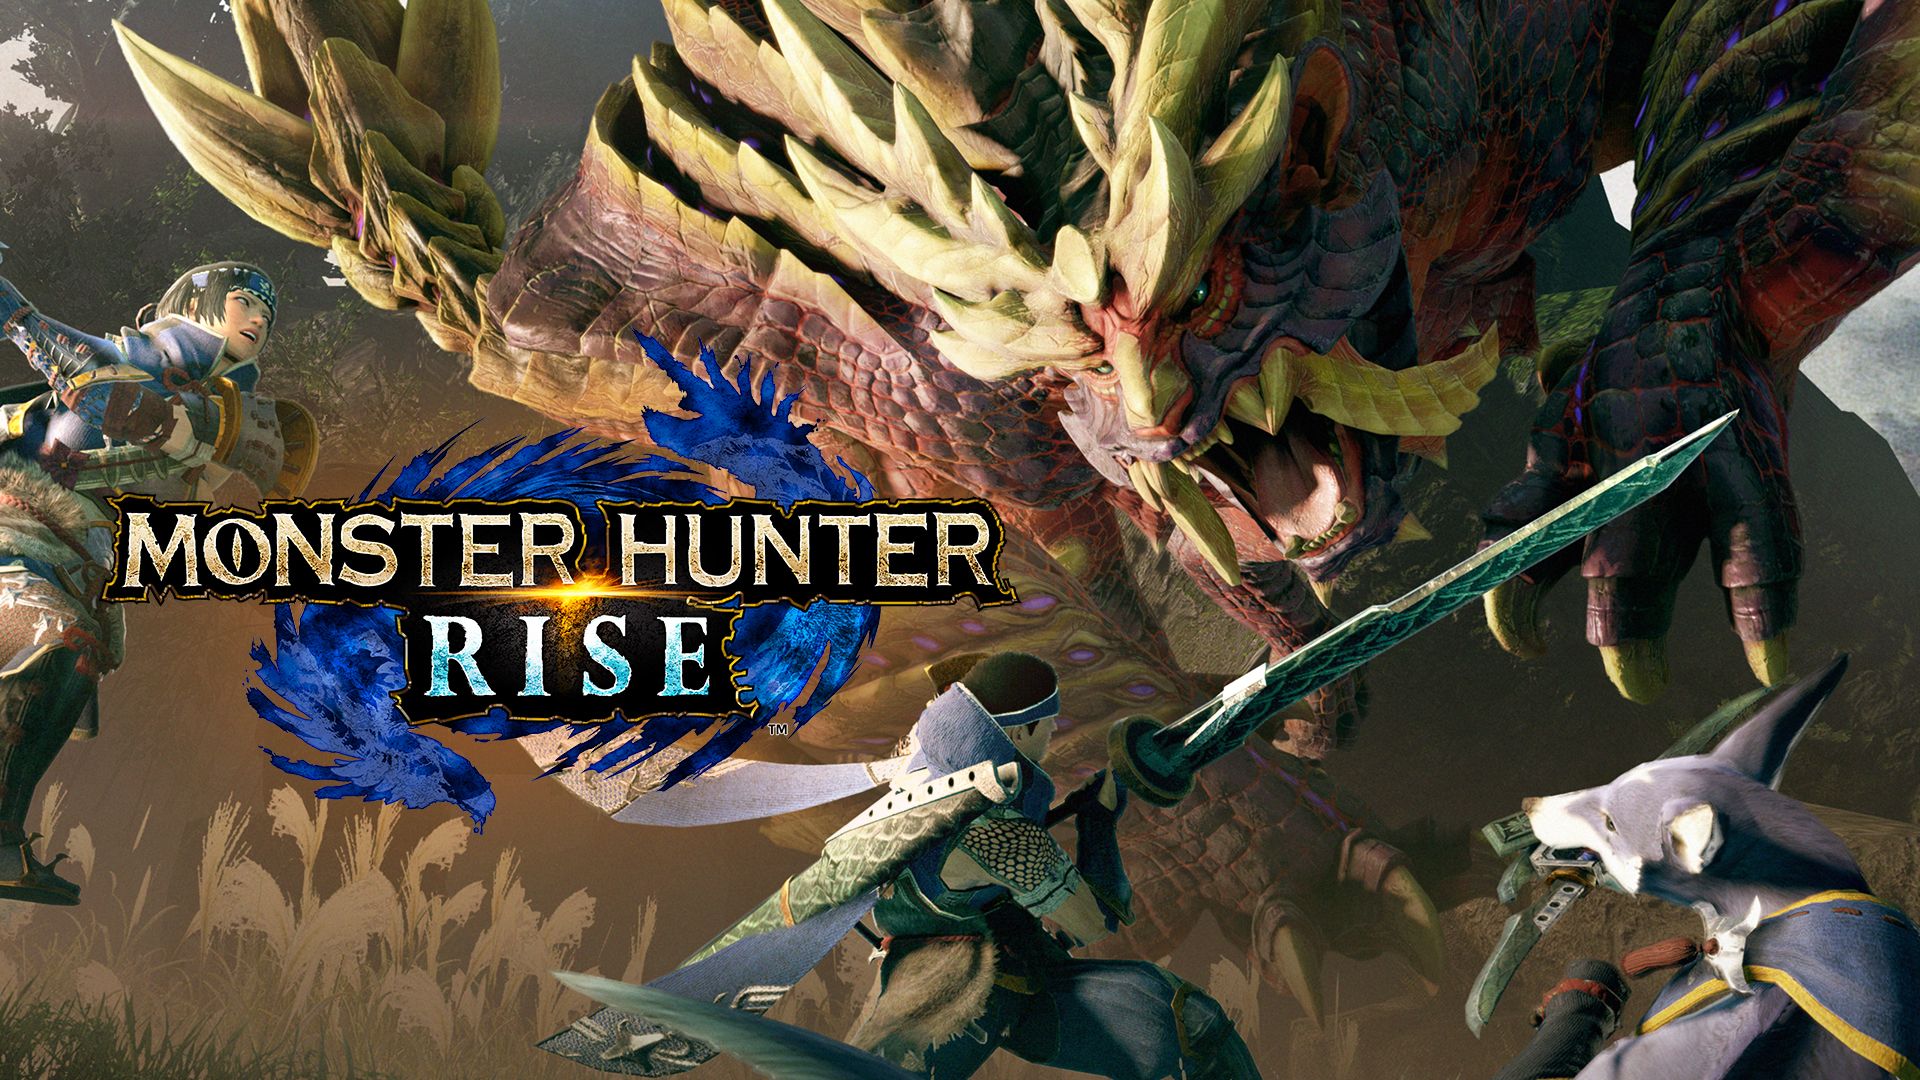 monster hunter rise ver 2.0 patch notes